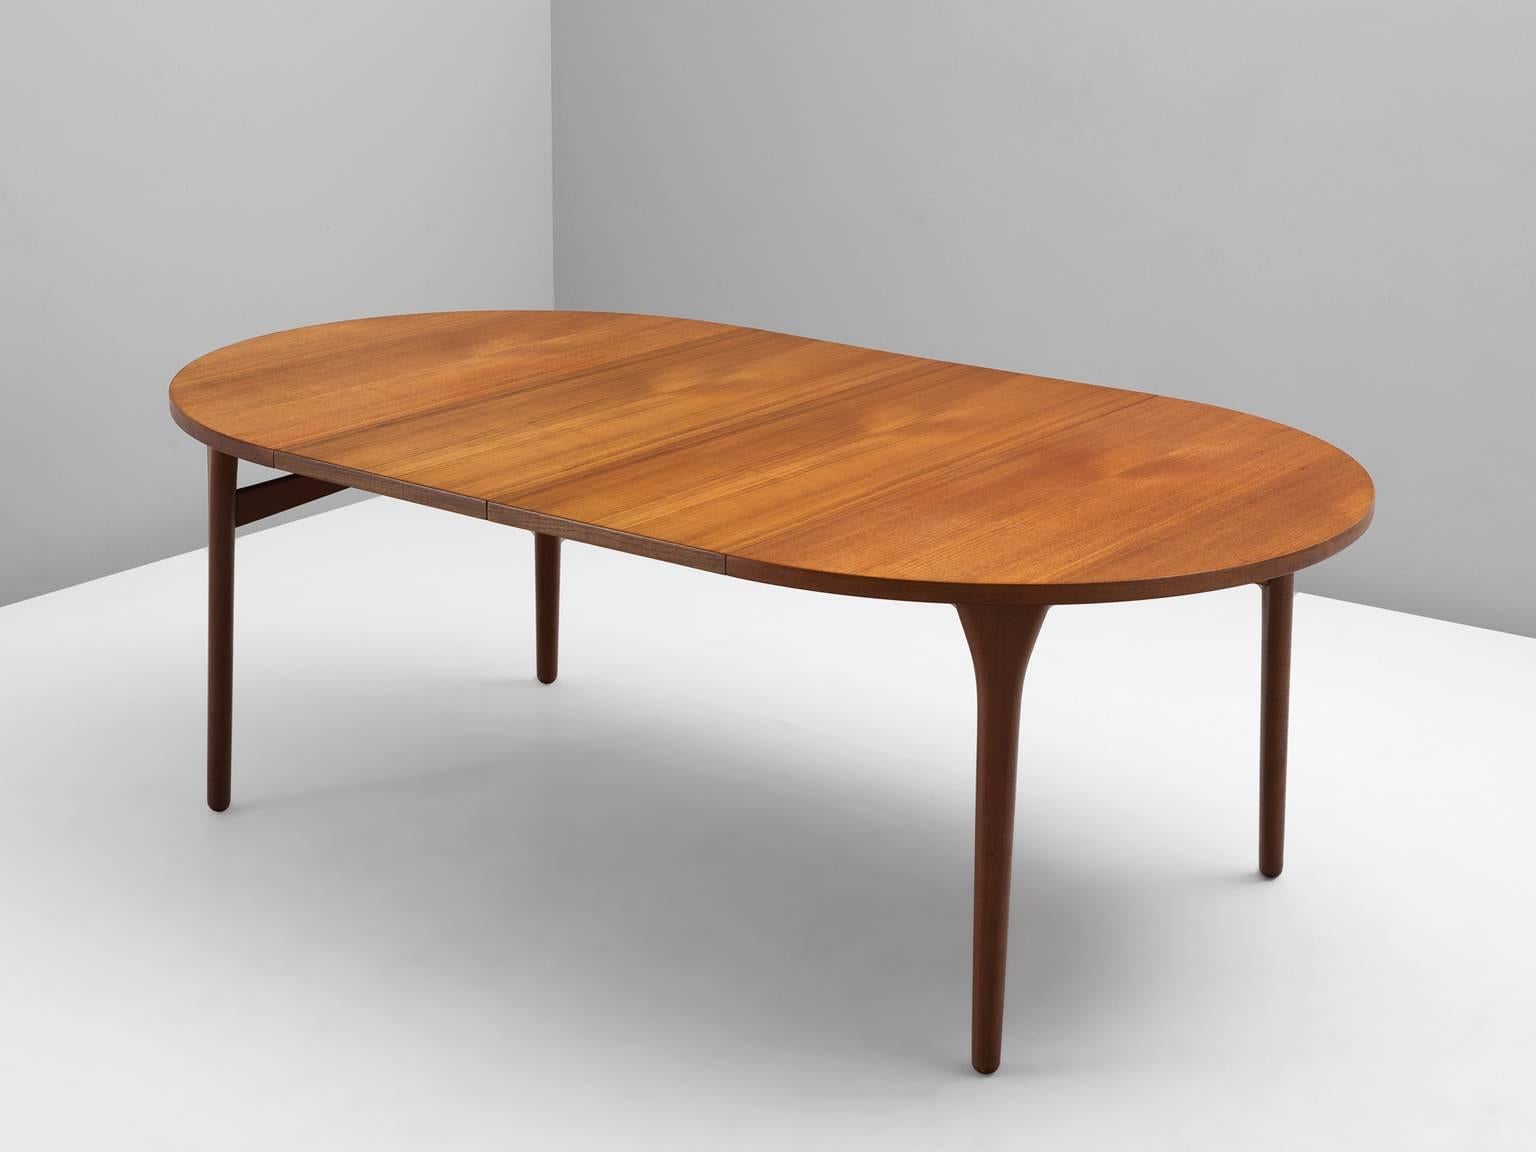 Dining table, in teak, by Henning Kjaernulf for Bruno Hansen, Denmark, 1950s.

Extendable dining table in teak. Large oval shaped table with two additional leafs. Beautiful grain is visible on the large oval top. Without the leaves this is an